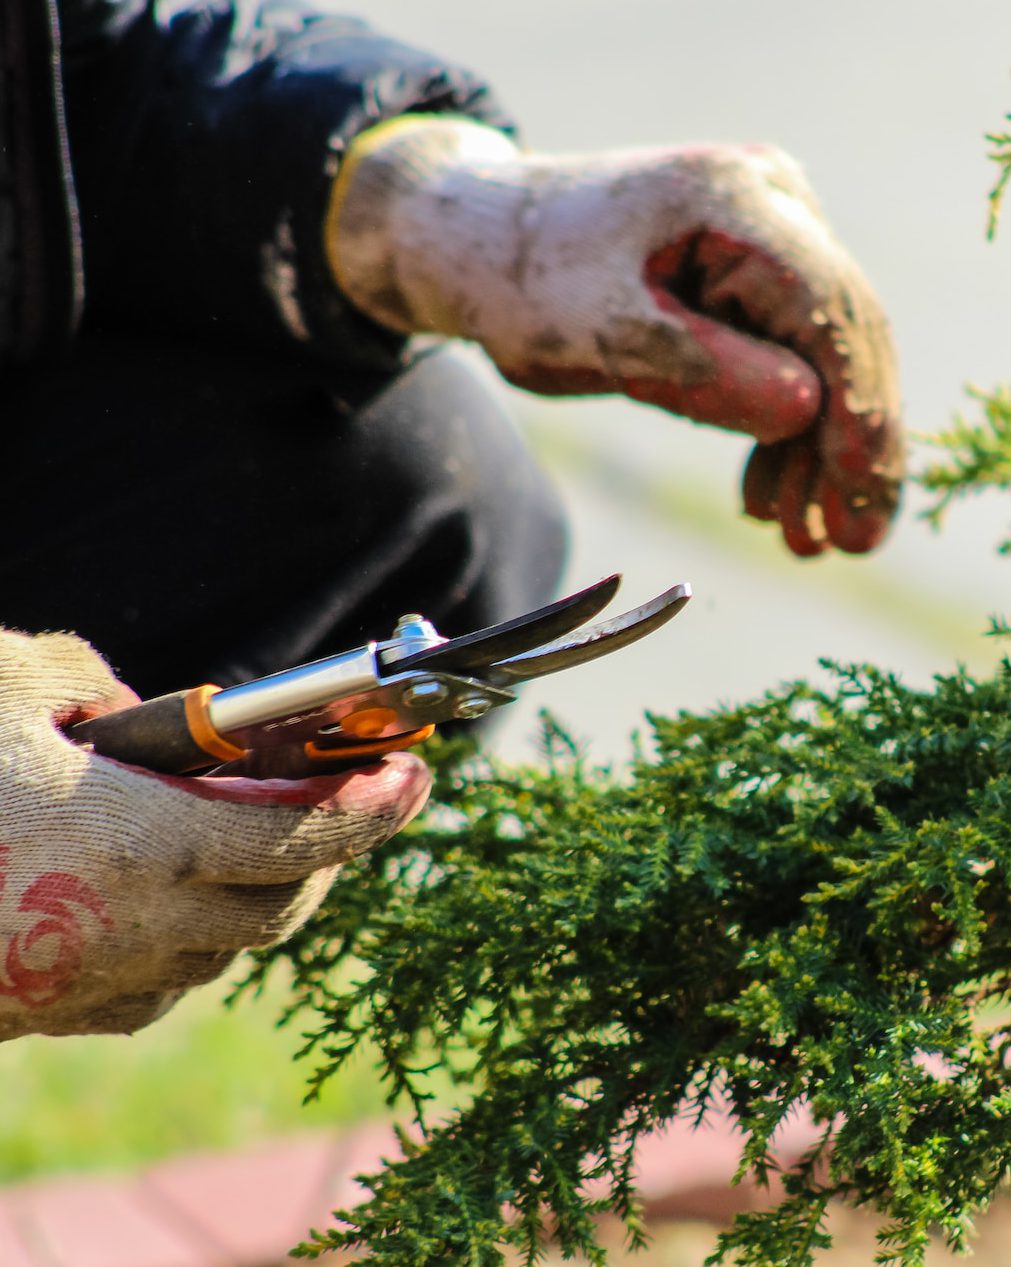 Person in using secateurs, cutting fern branches